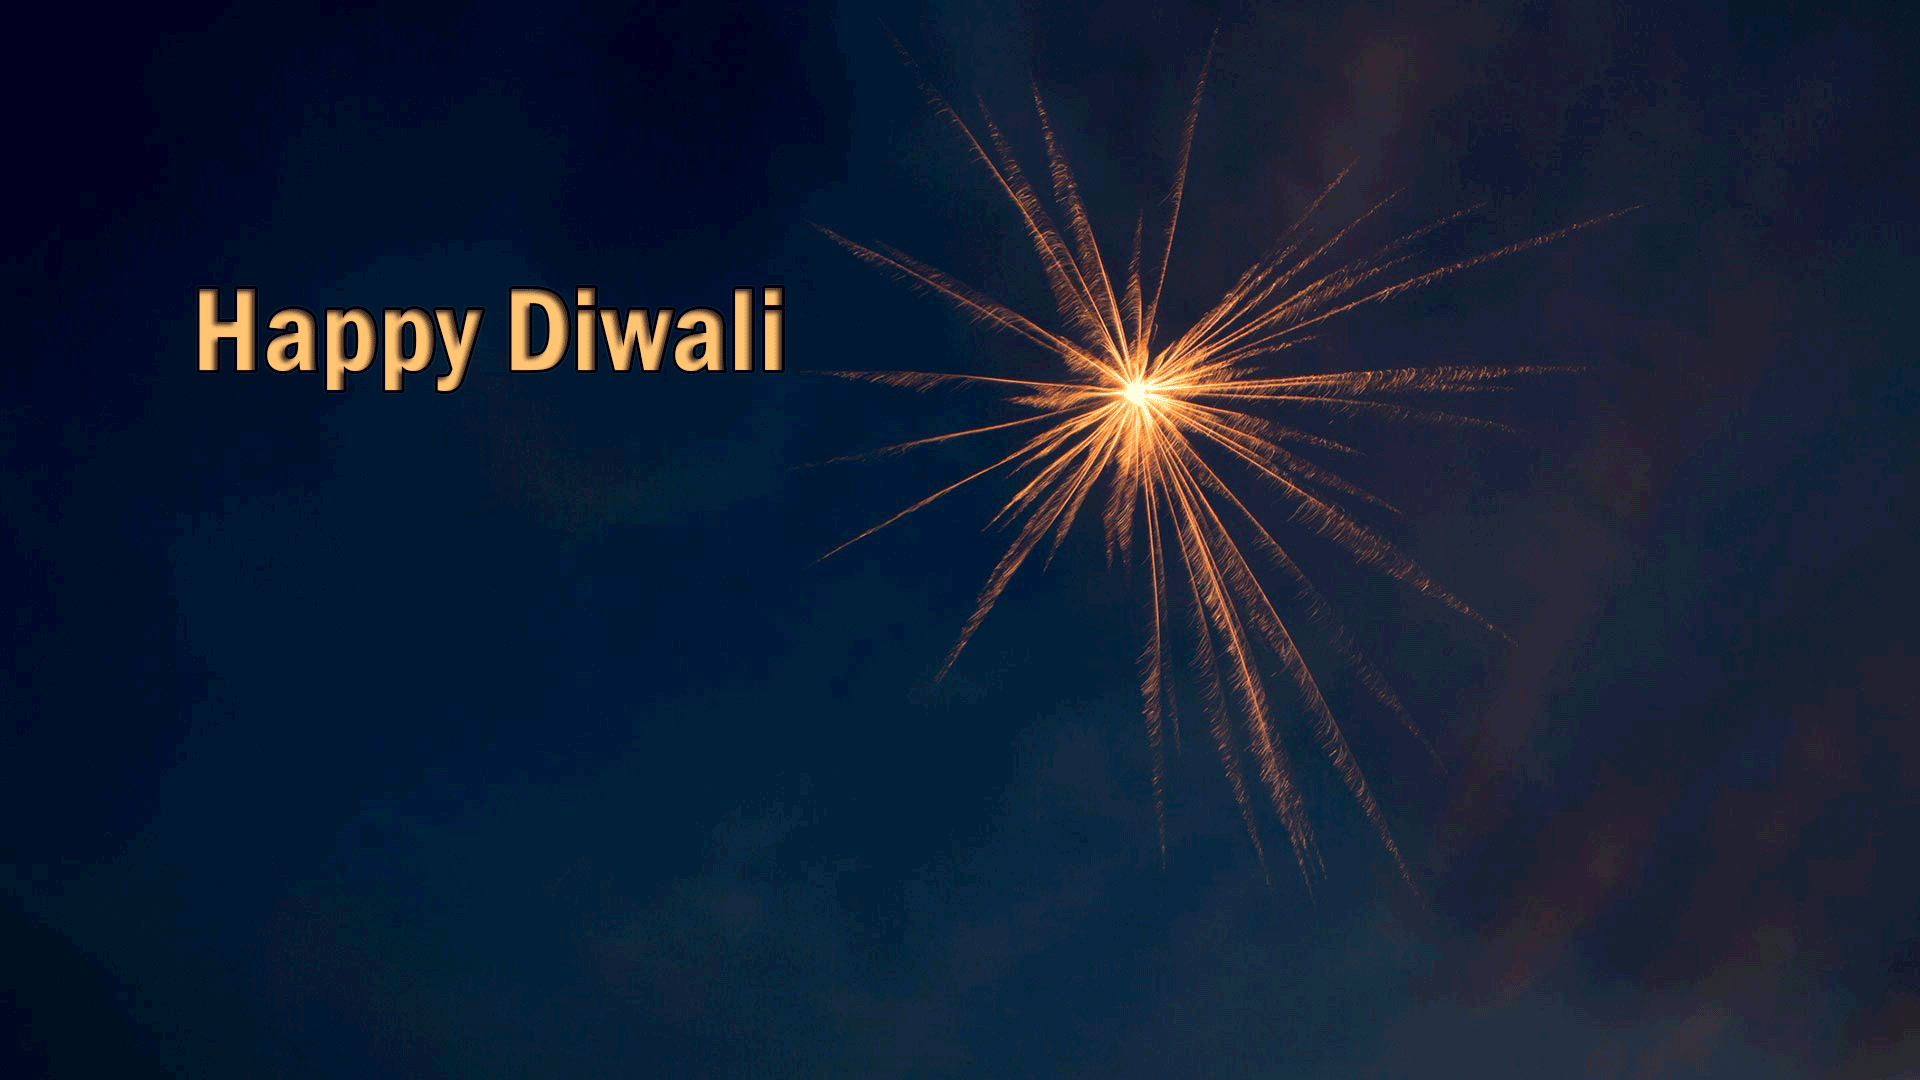 Happy Diwali Gif & Images 2017 - 9to5 Car Wallpapers